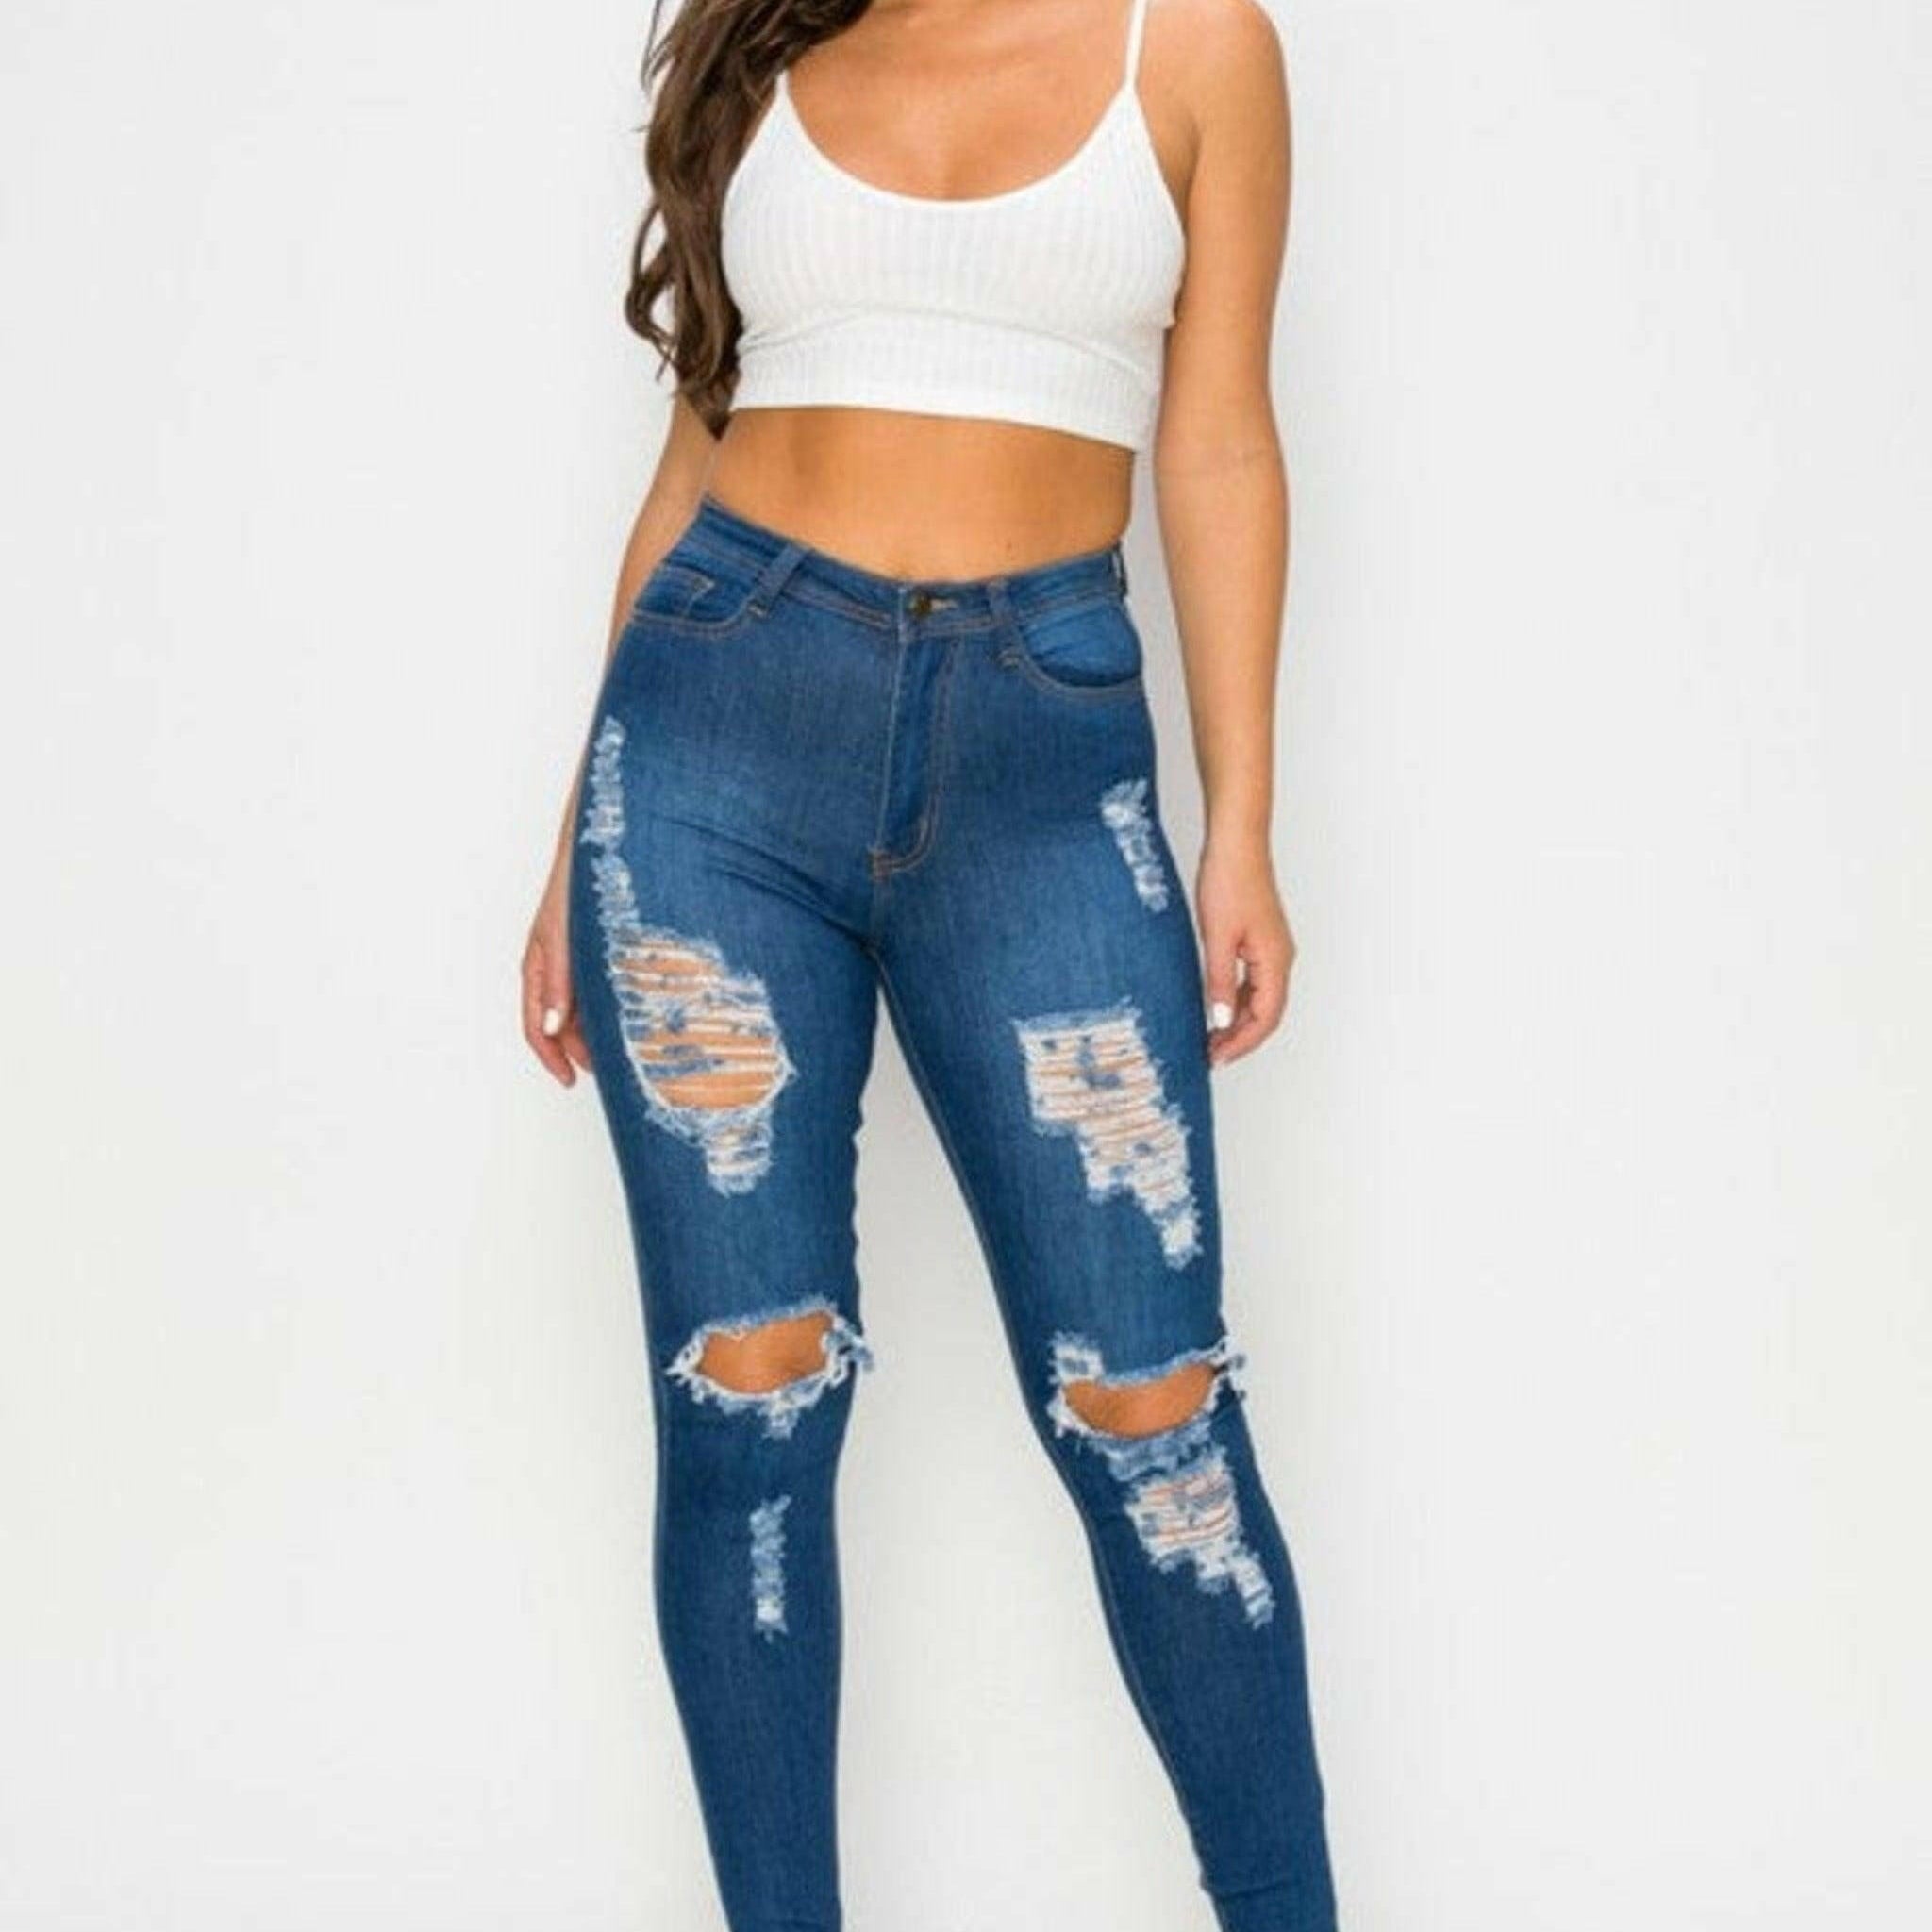 Epicplacess JEANS Small / Blue / United States Ootd Vibes High Waisted Women Jeans LO-194 A1